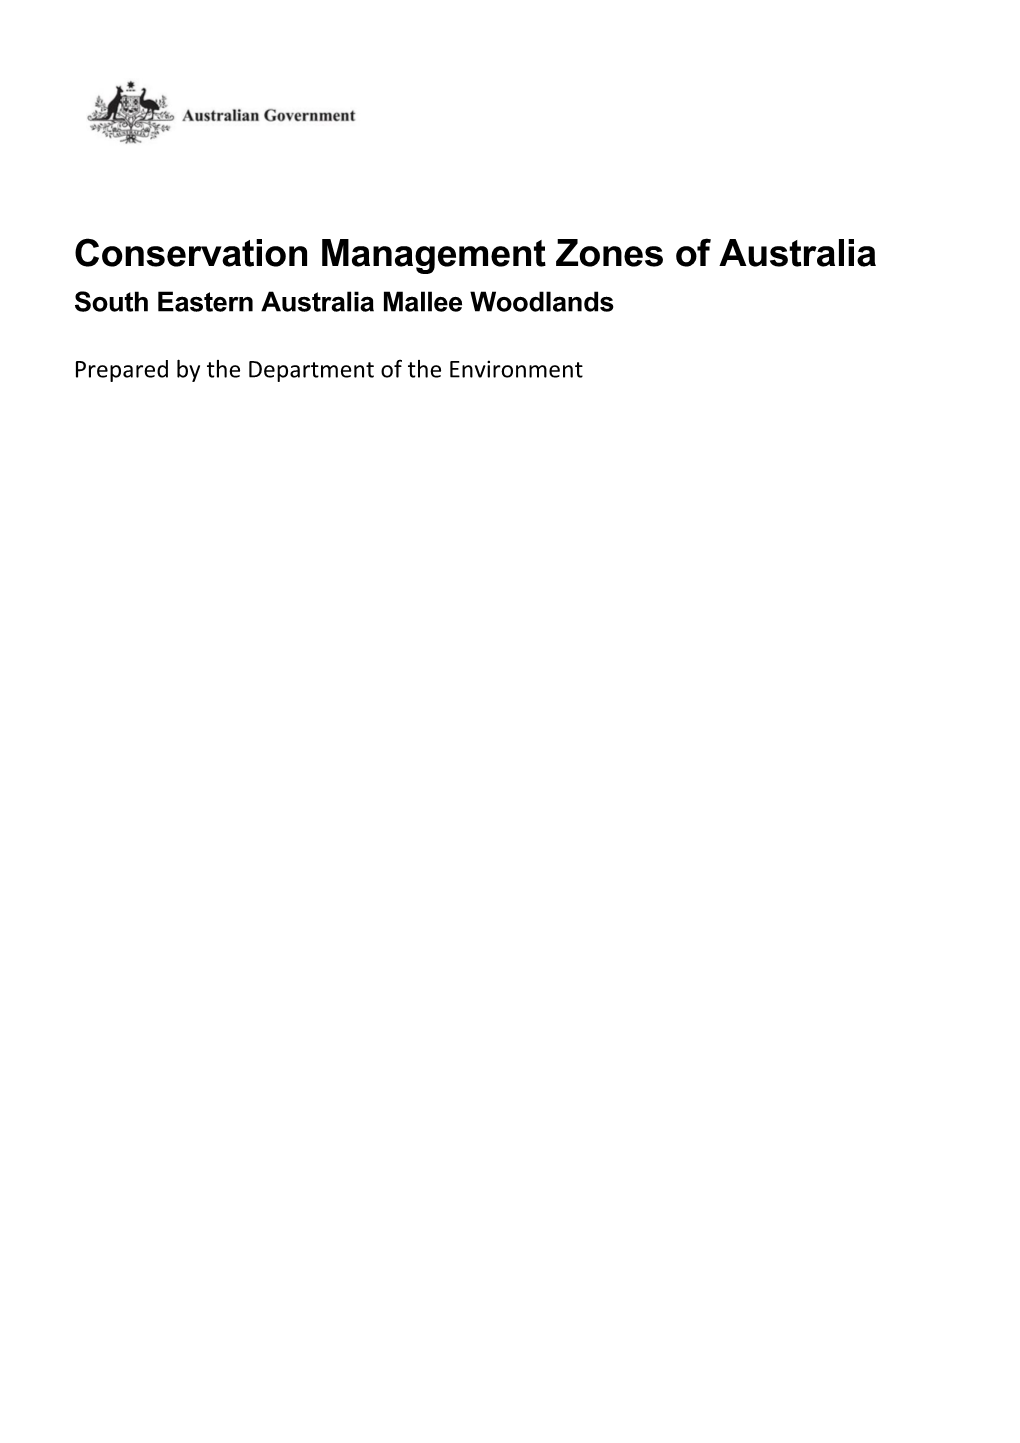 Conservation Management Zones of Australia: South Eastern Australia Mallee Woodlands